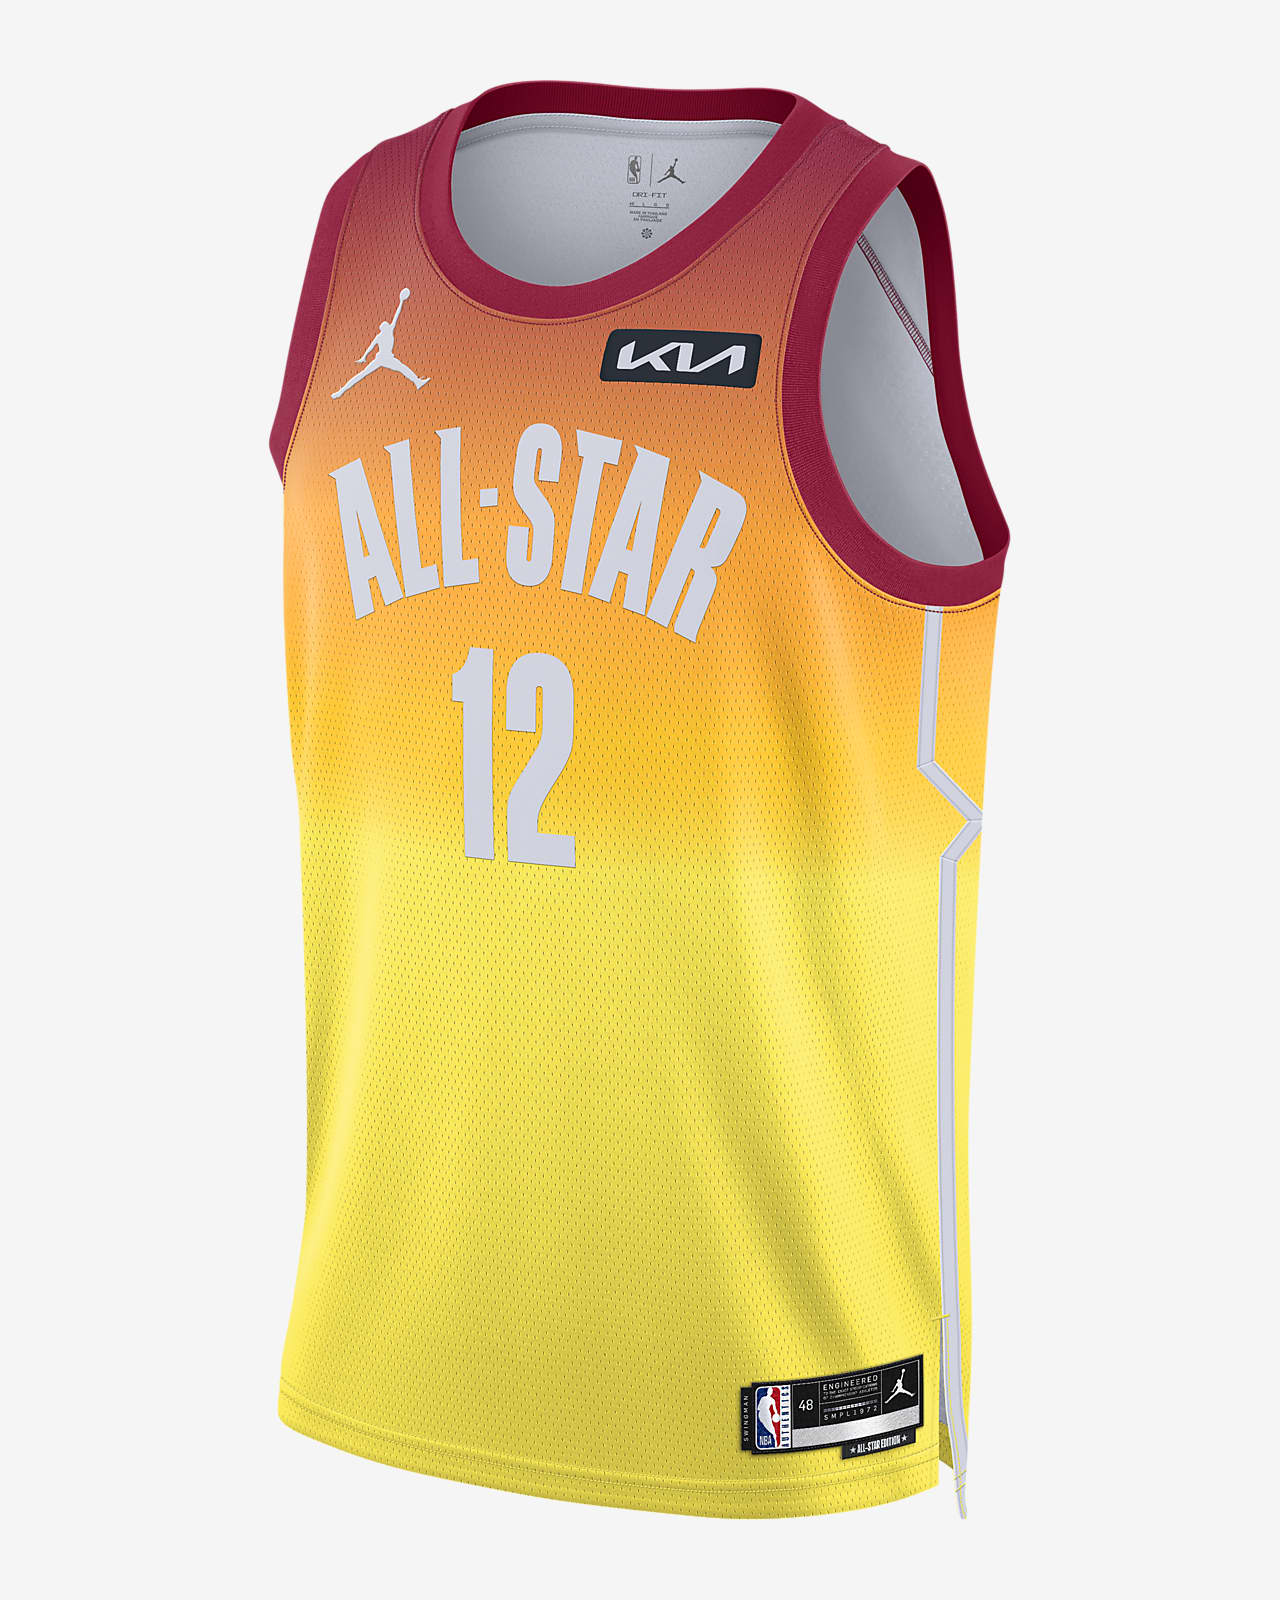 where to buy nba jerseys for cheap